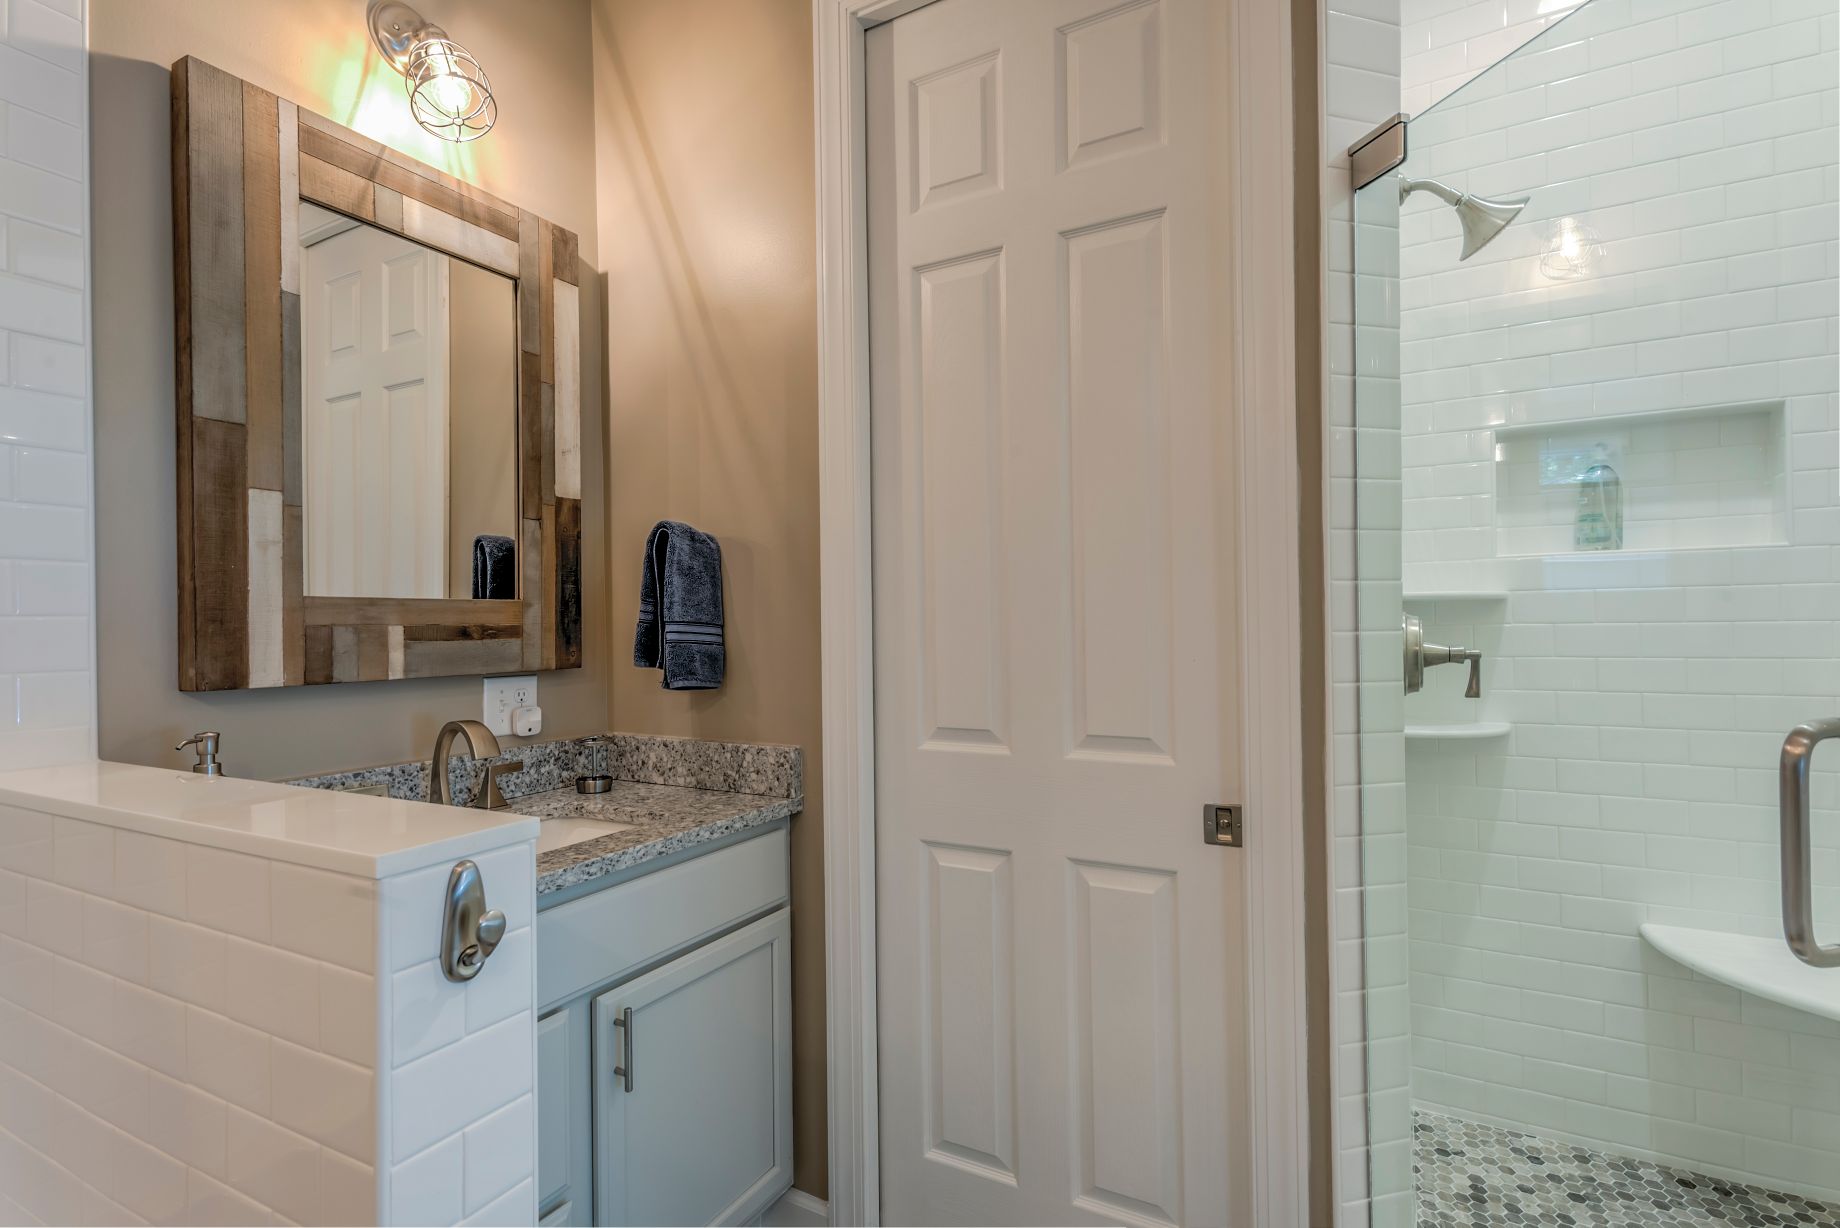 Bathroom in Juniper Court, Ocean Pines MD with Compact Sink and Large Square Mirror with Mosaic Frame